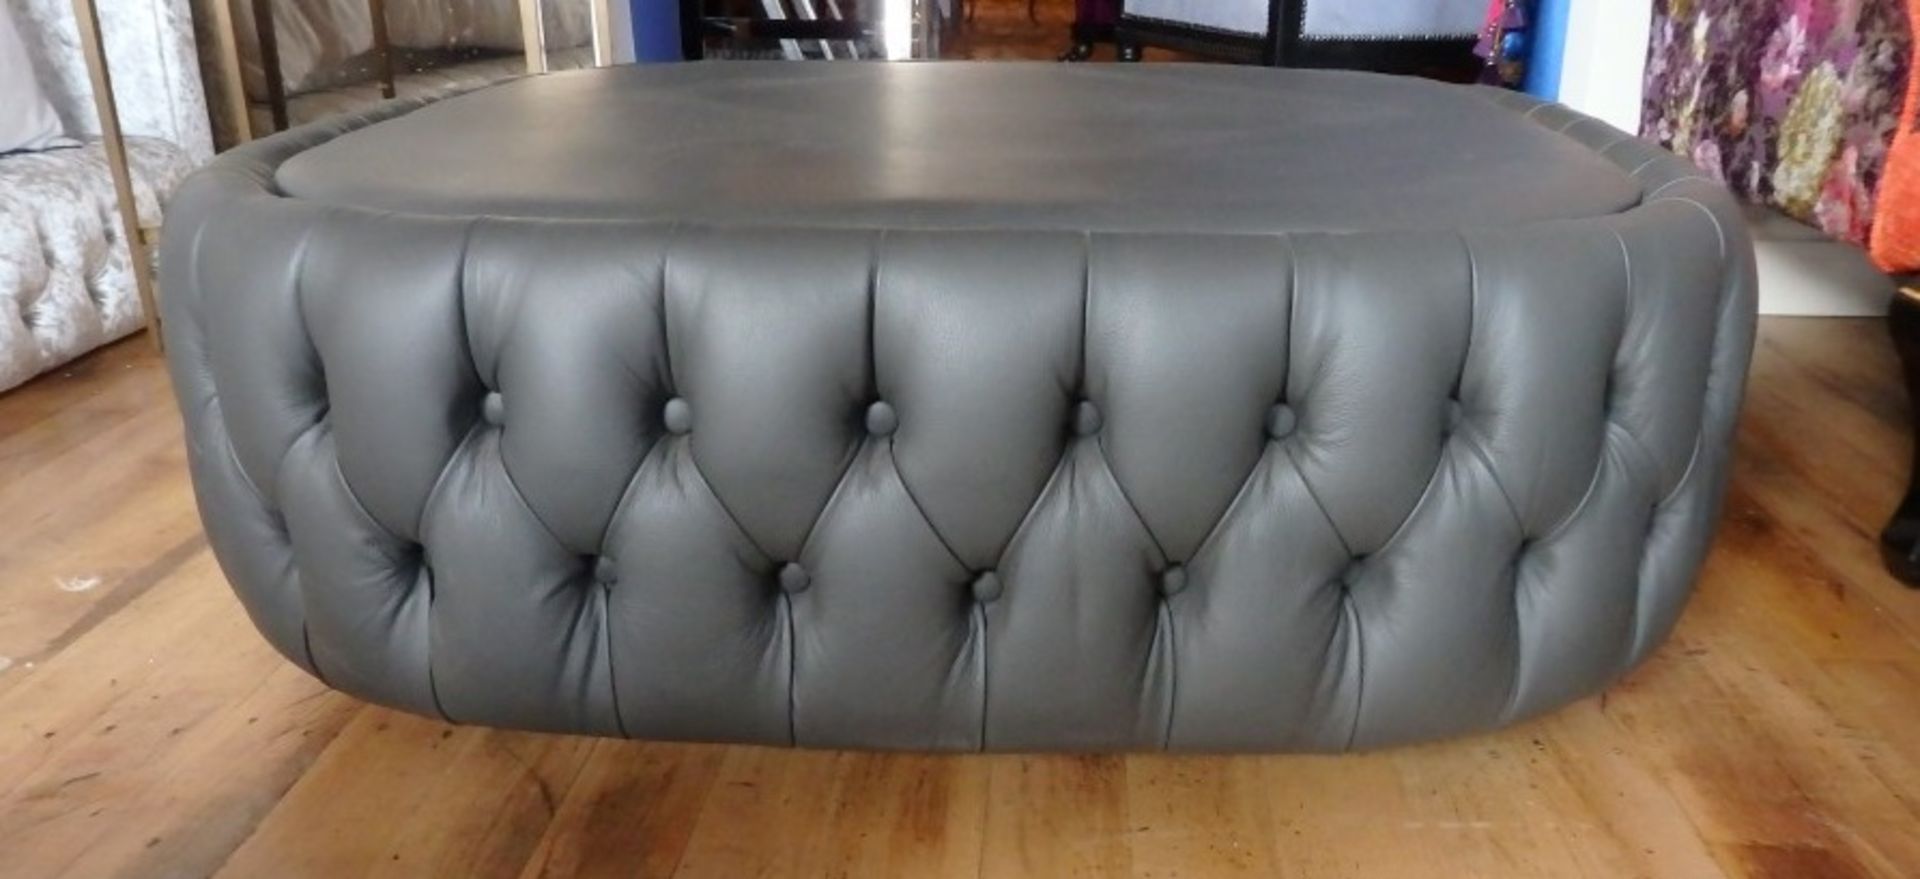 1 x Large Bespoke Handcrafted Buttoned Leather Pouffe In Grey - Expertly Built And Upholstered by - Image 3 of 5